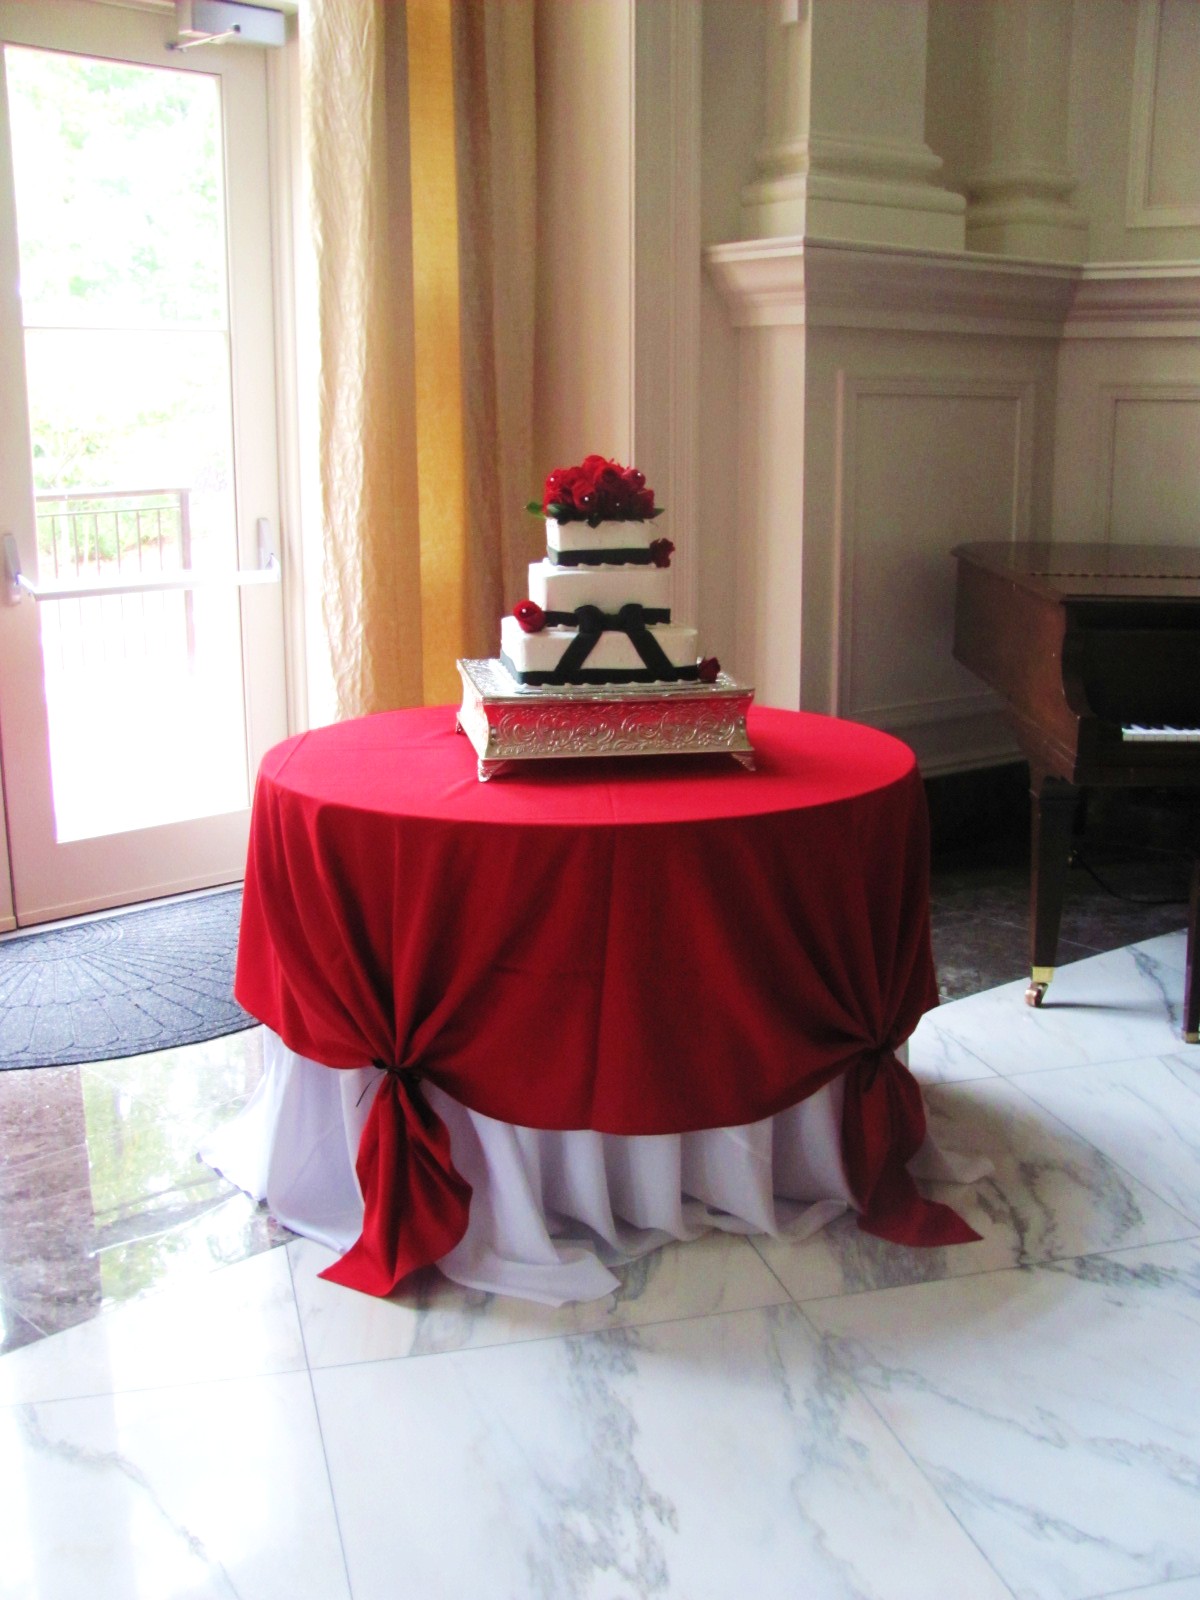 Red, Black, and White Wedding